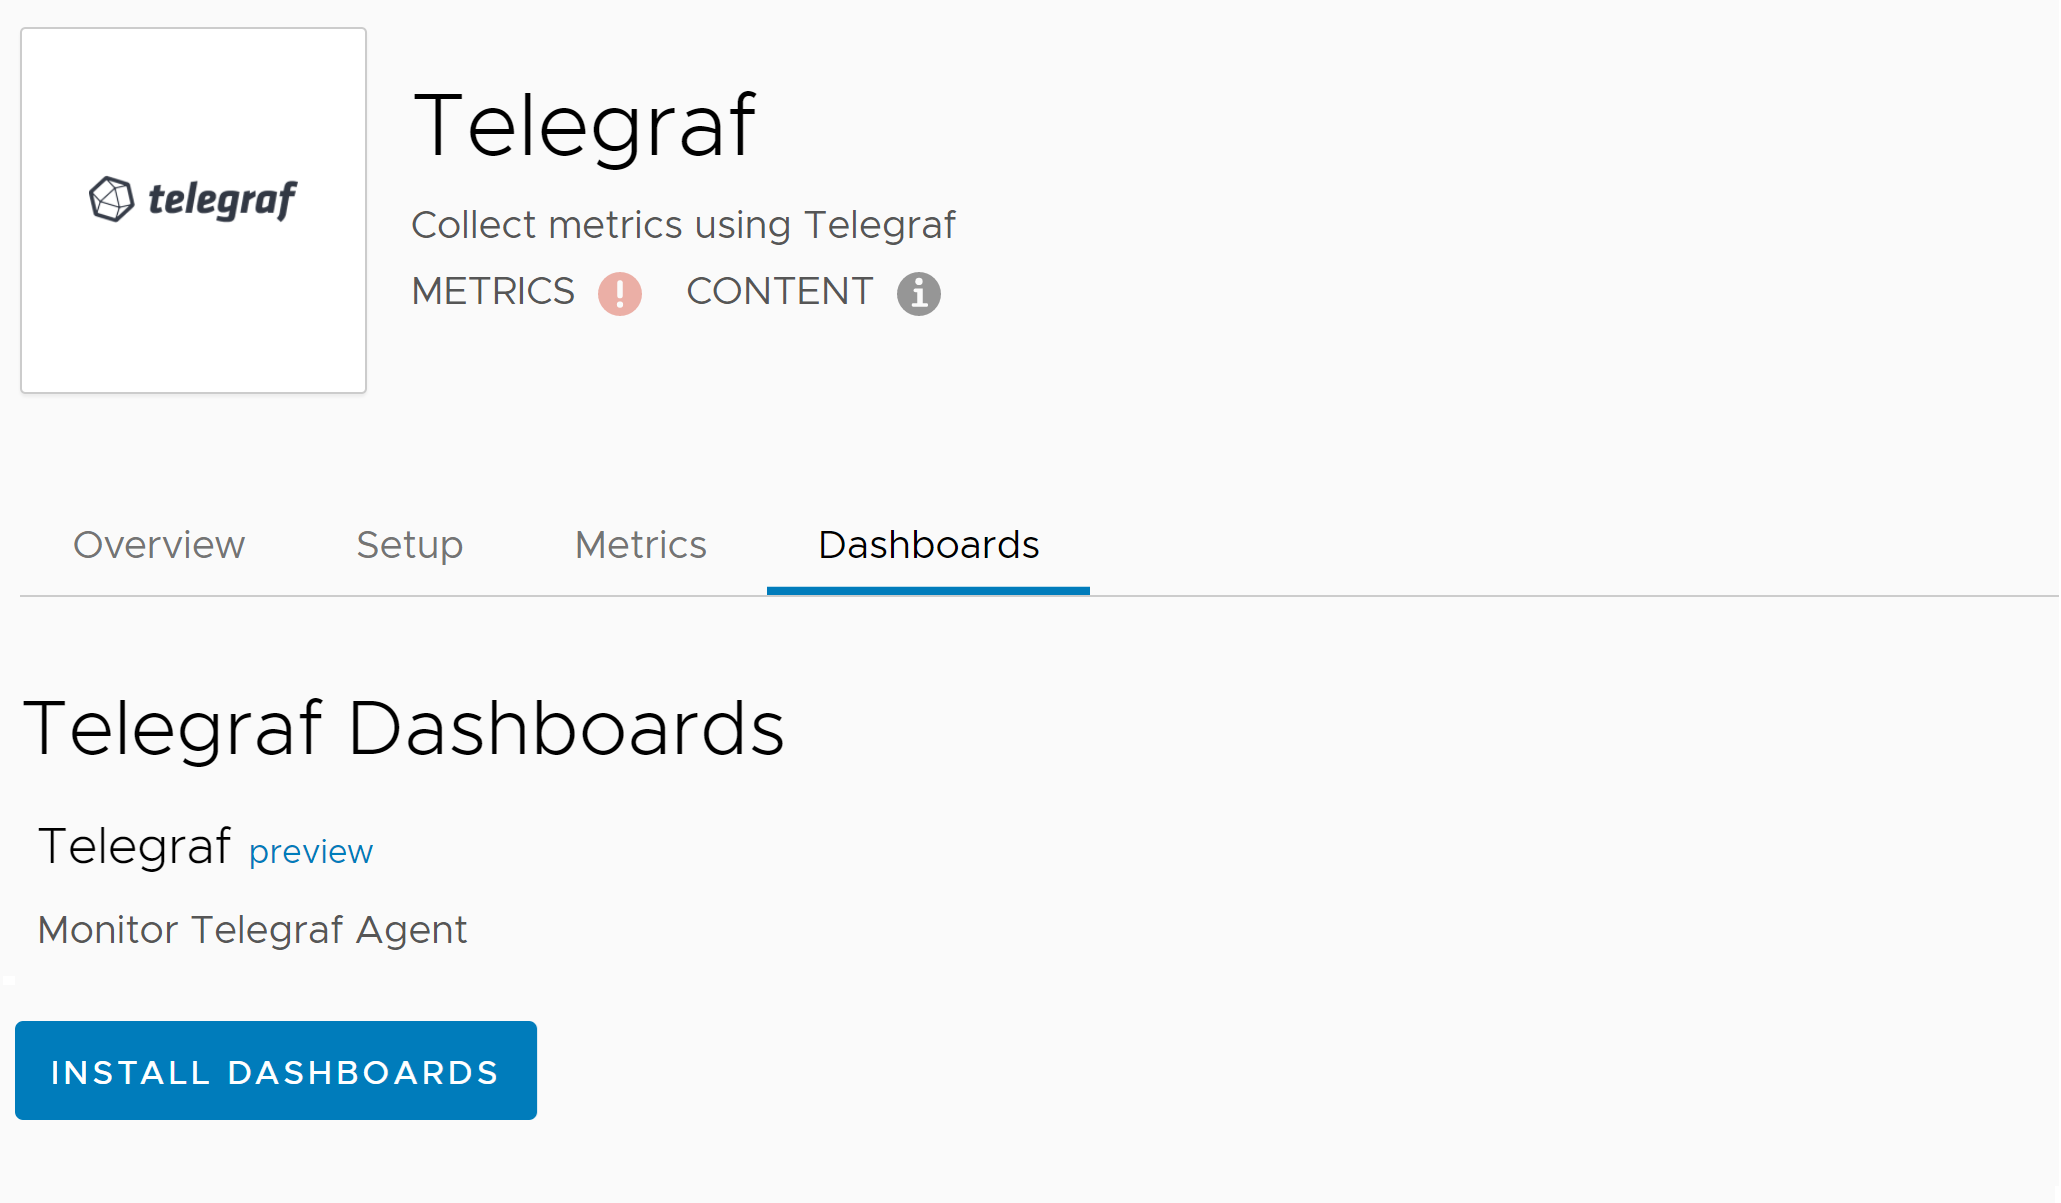 Integration landing page for Telegraf, Install Dashboards button shows